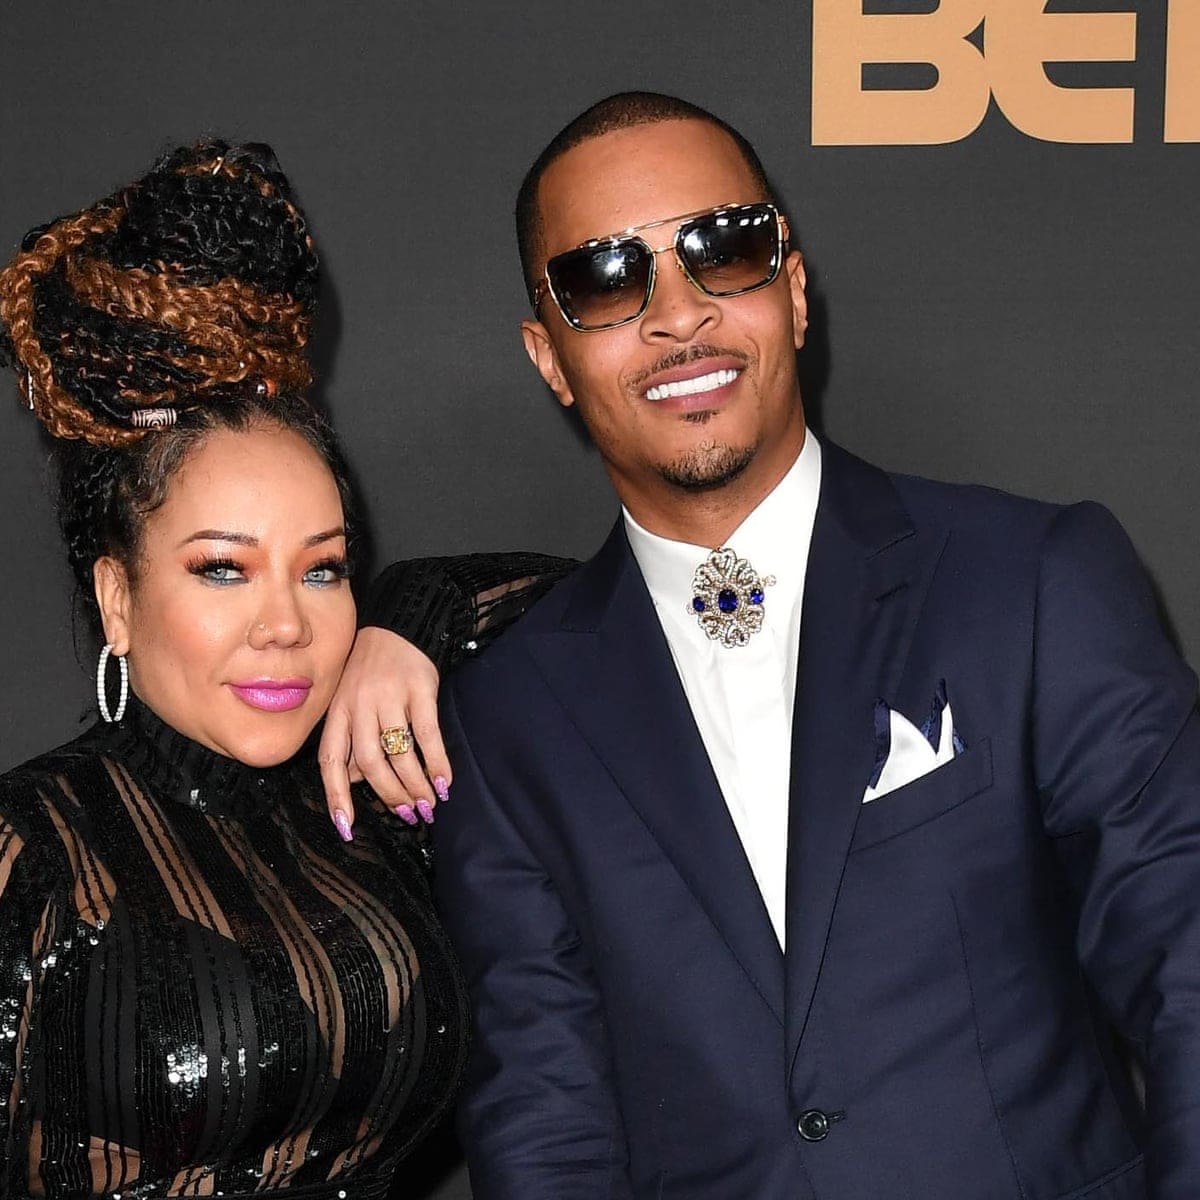 T.I. Shares His Favorite Recent Reads - Check Them Out Here